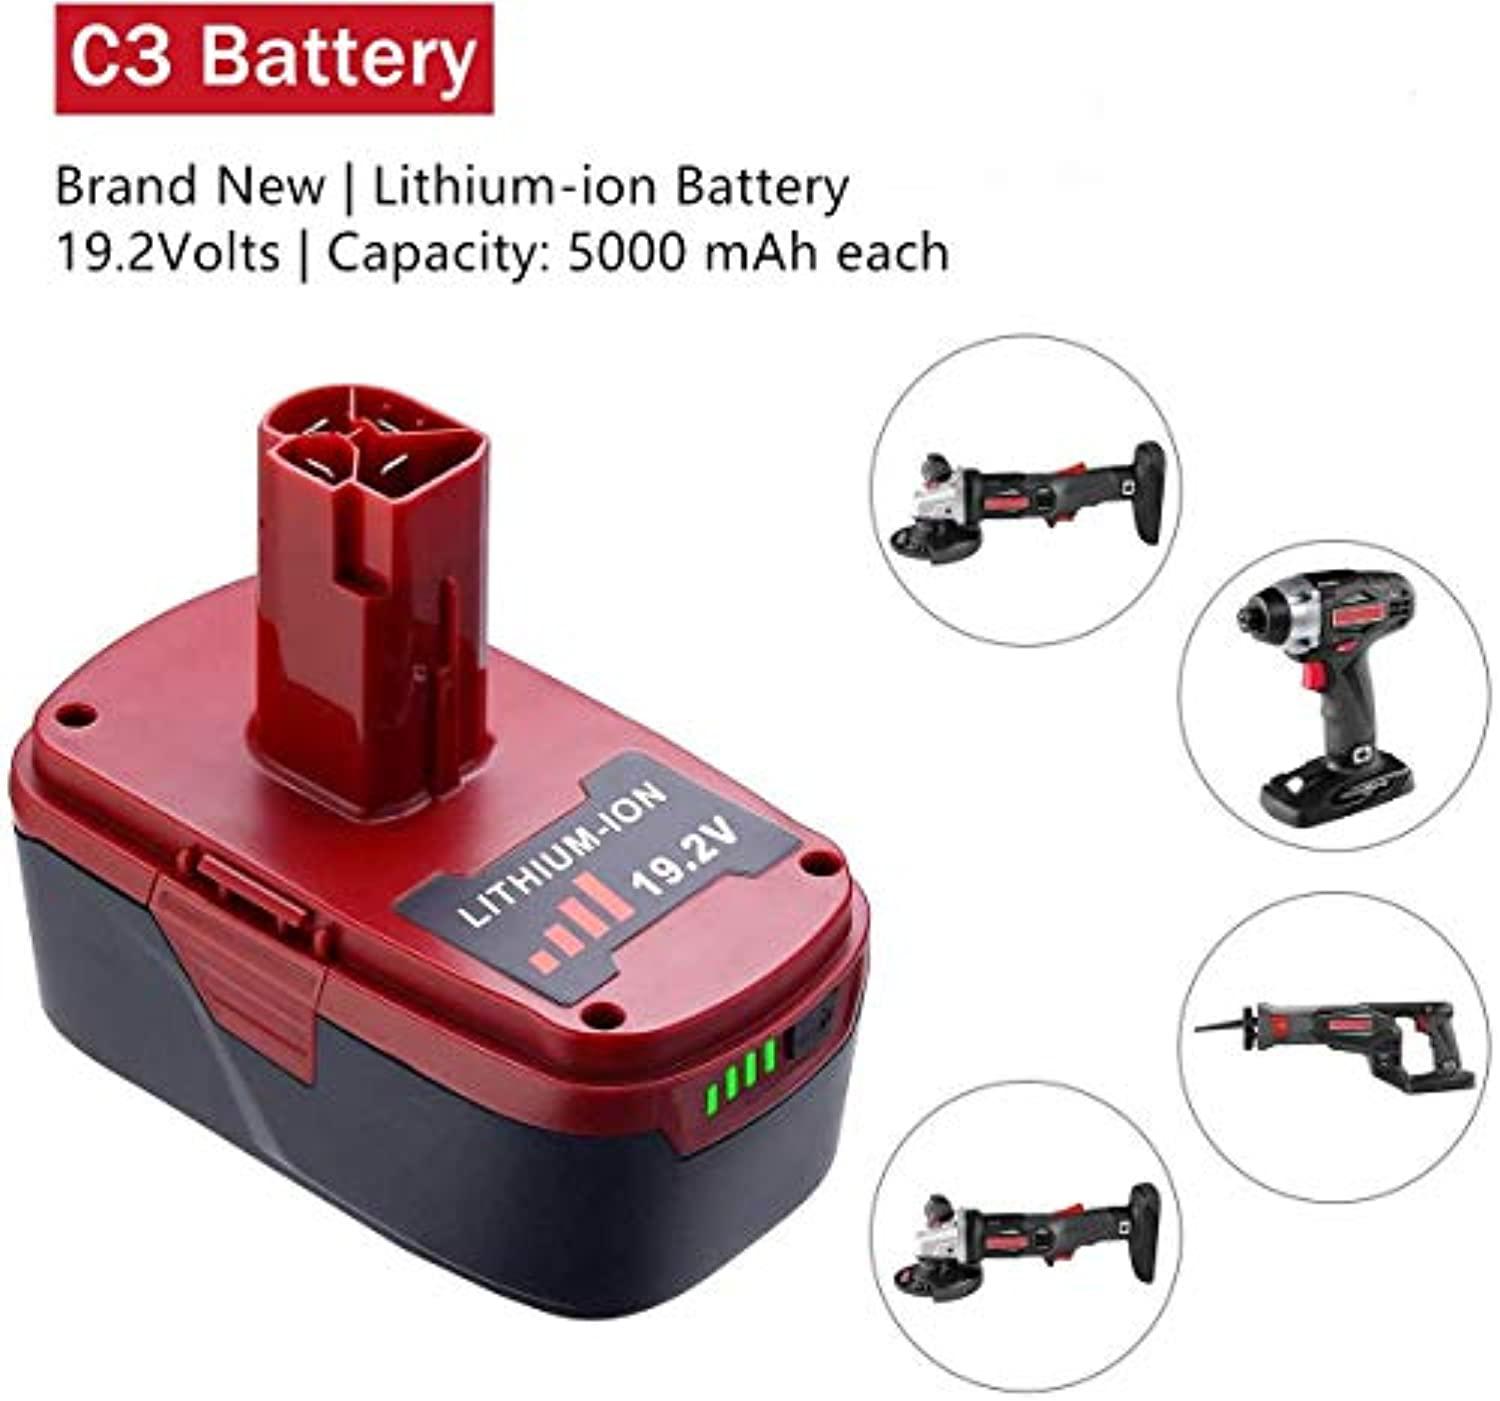 Vanttech 2pack upgraded 5.0ah c3 lithium battery replace for craftsman 19.2 volt battery diehard c3 xcp 3130211004 130279005 11375 110